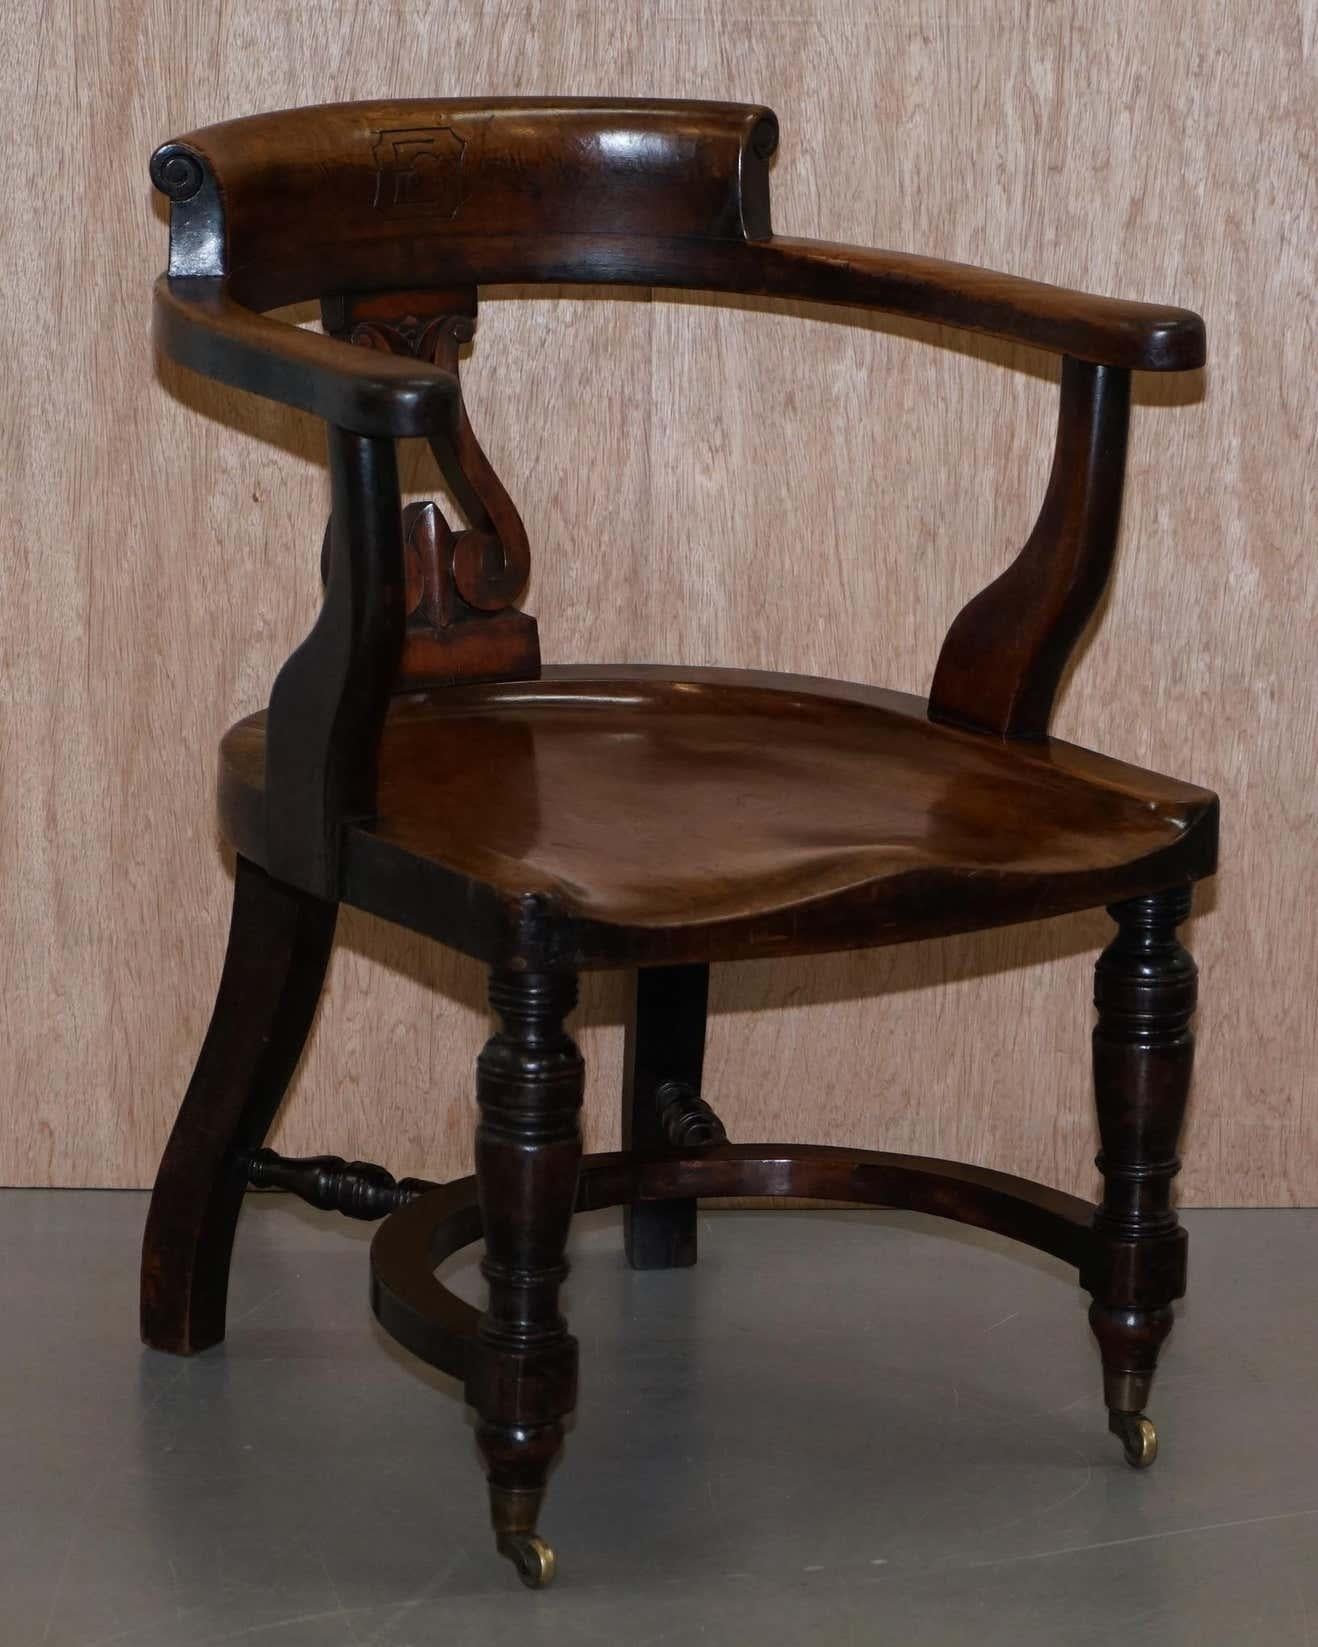 We are delighted to offer for sale this stunning and important original Victorian Walnut Eton College captain’s chair with carved with EC in the back rest.

A substantial find, I have never seen this chair for sale before, perfect as an office